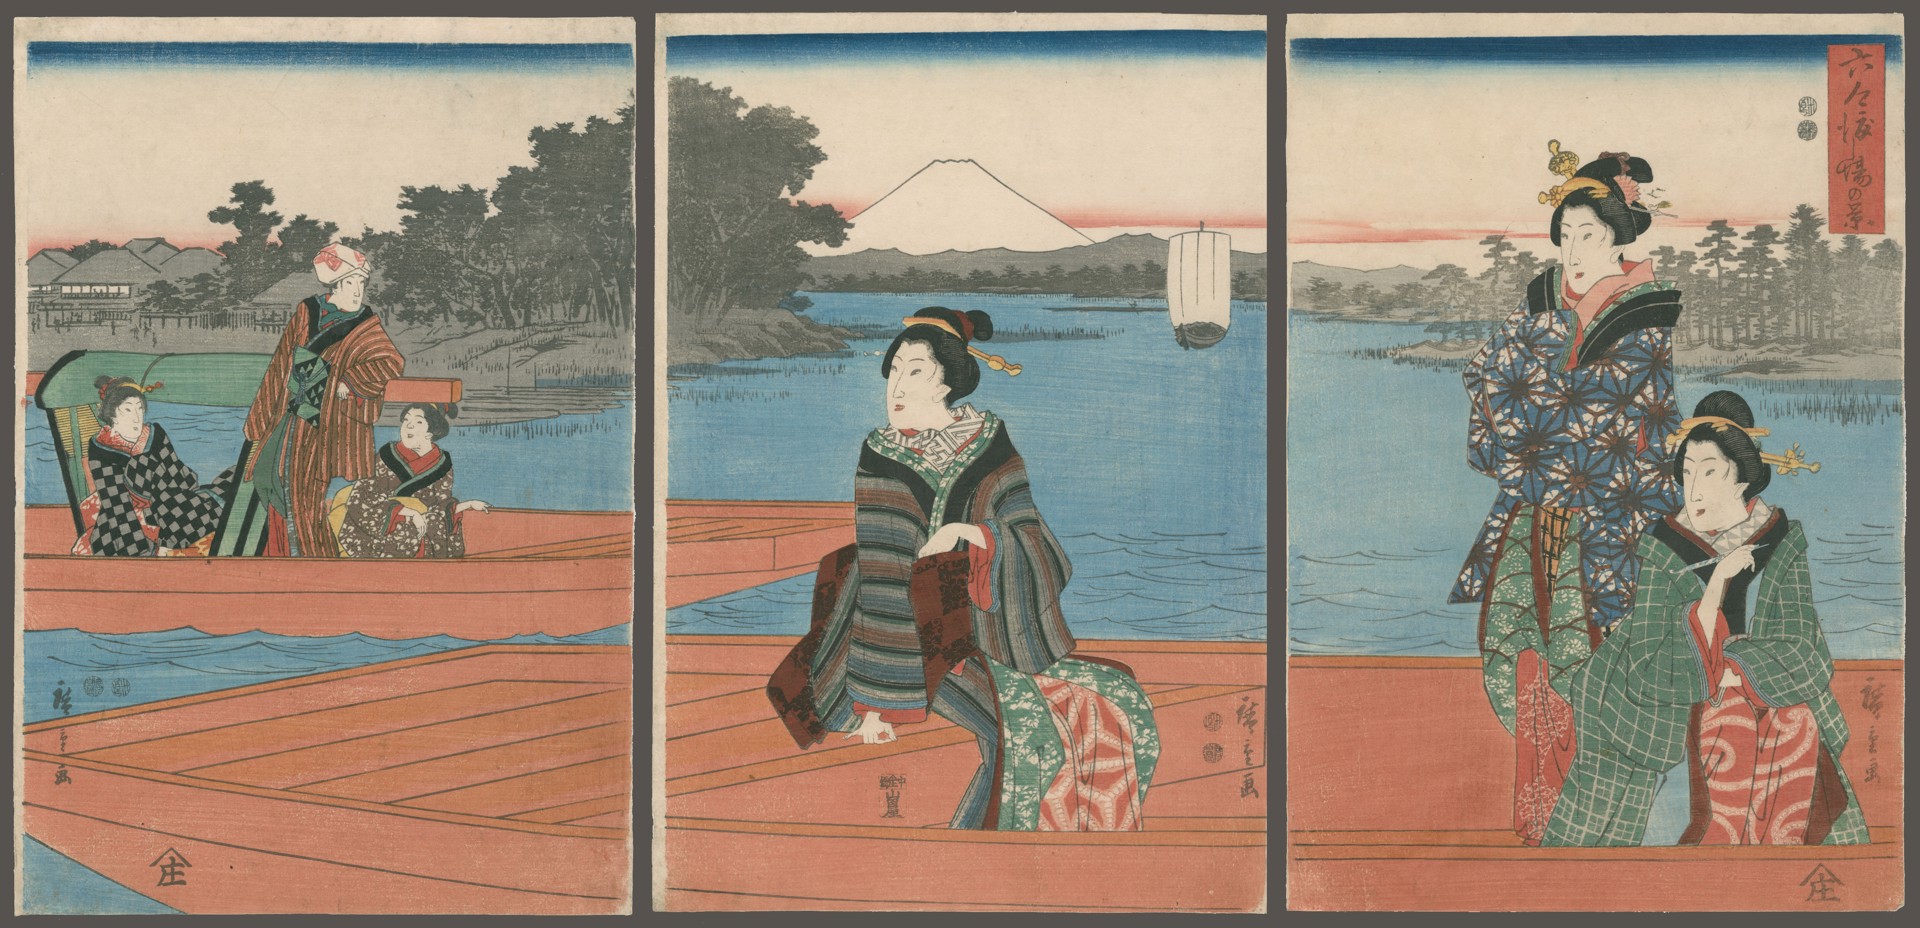 View of Rokugo Passage by Hiroshige